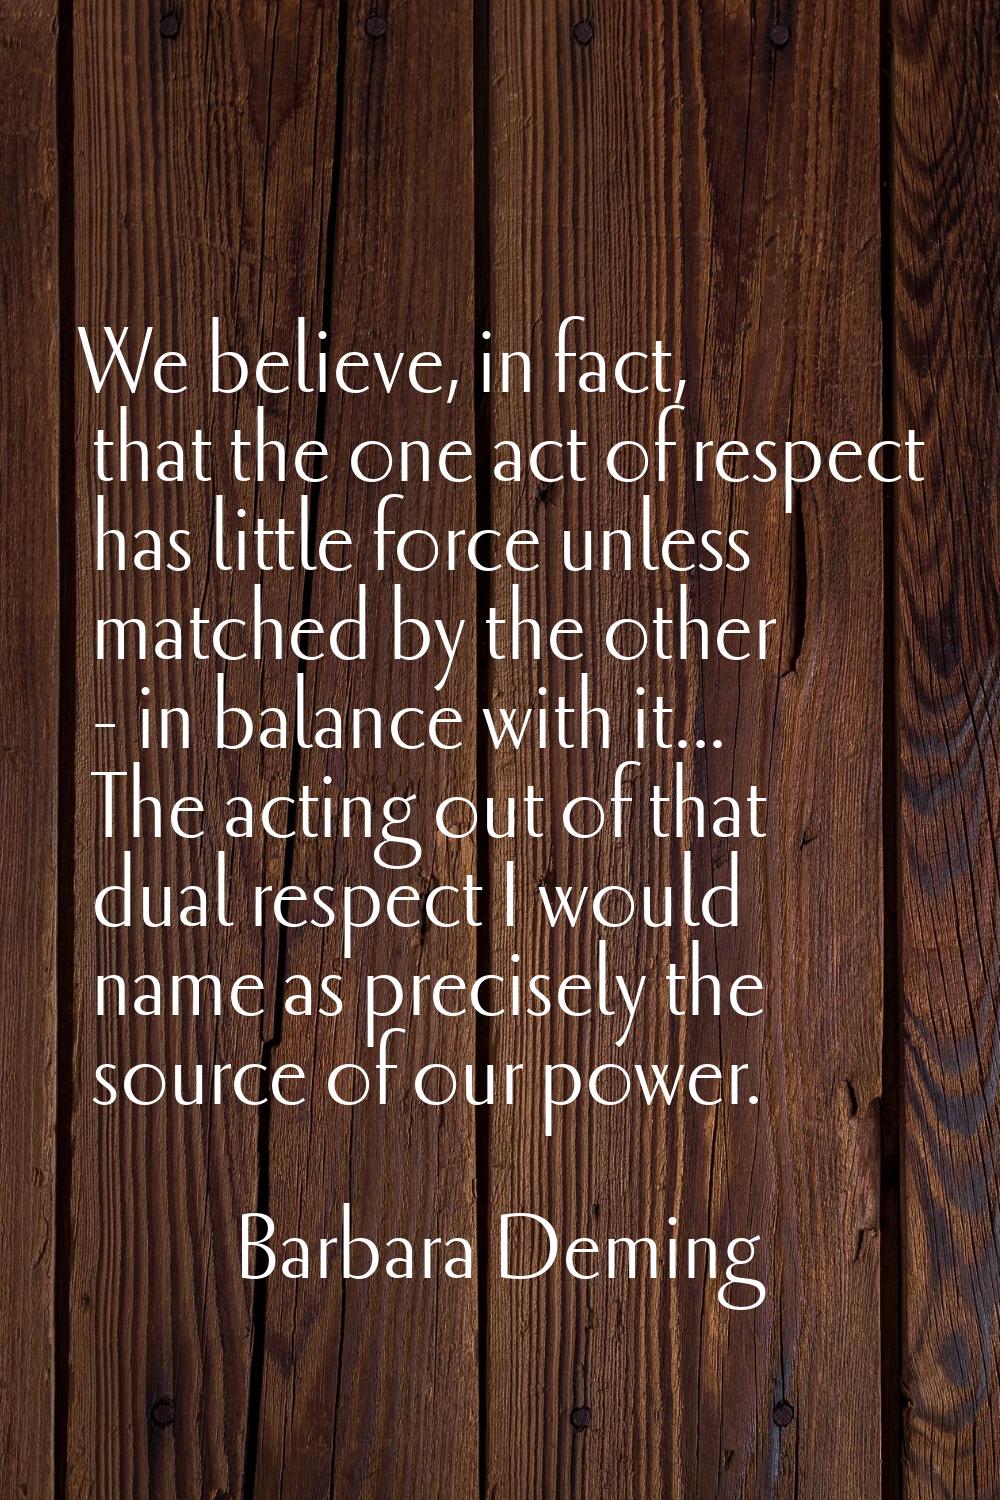 We believe, in fact, that the one act of respect has little force unless matched by the other - in 